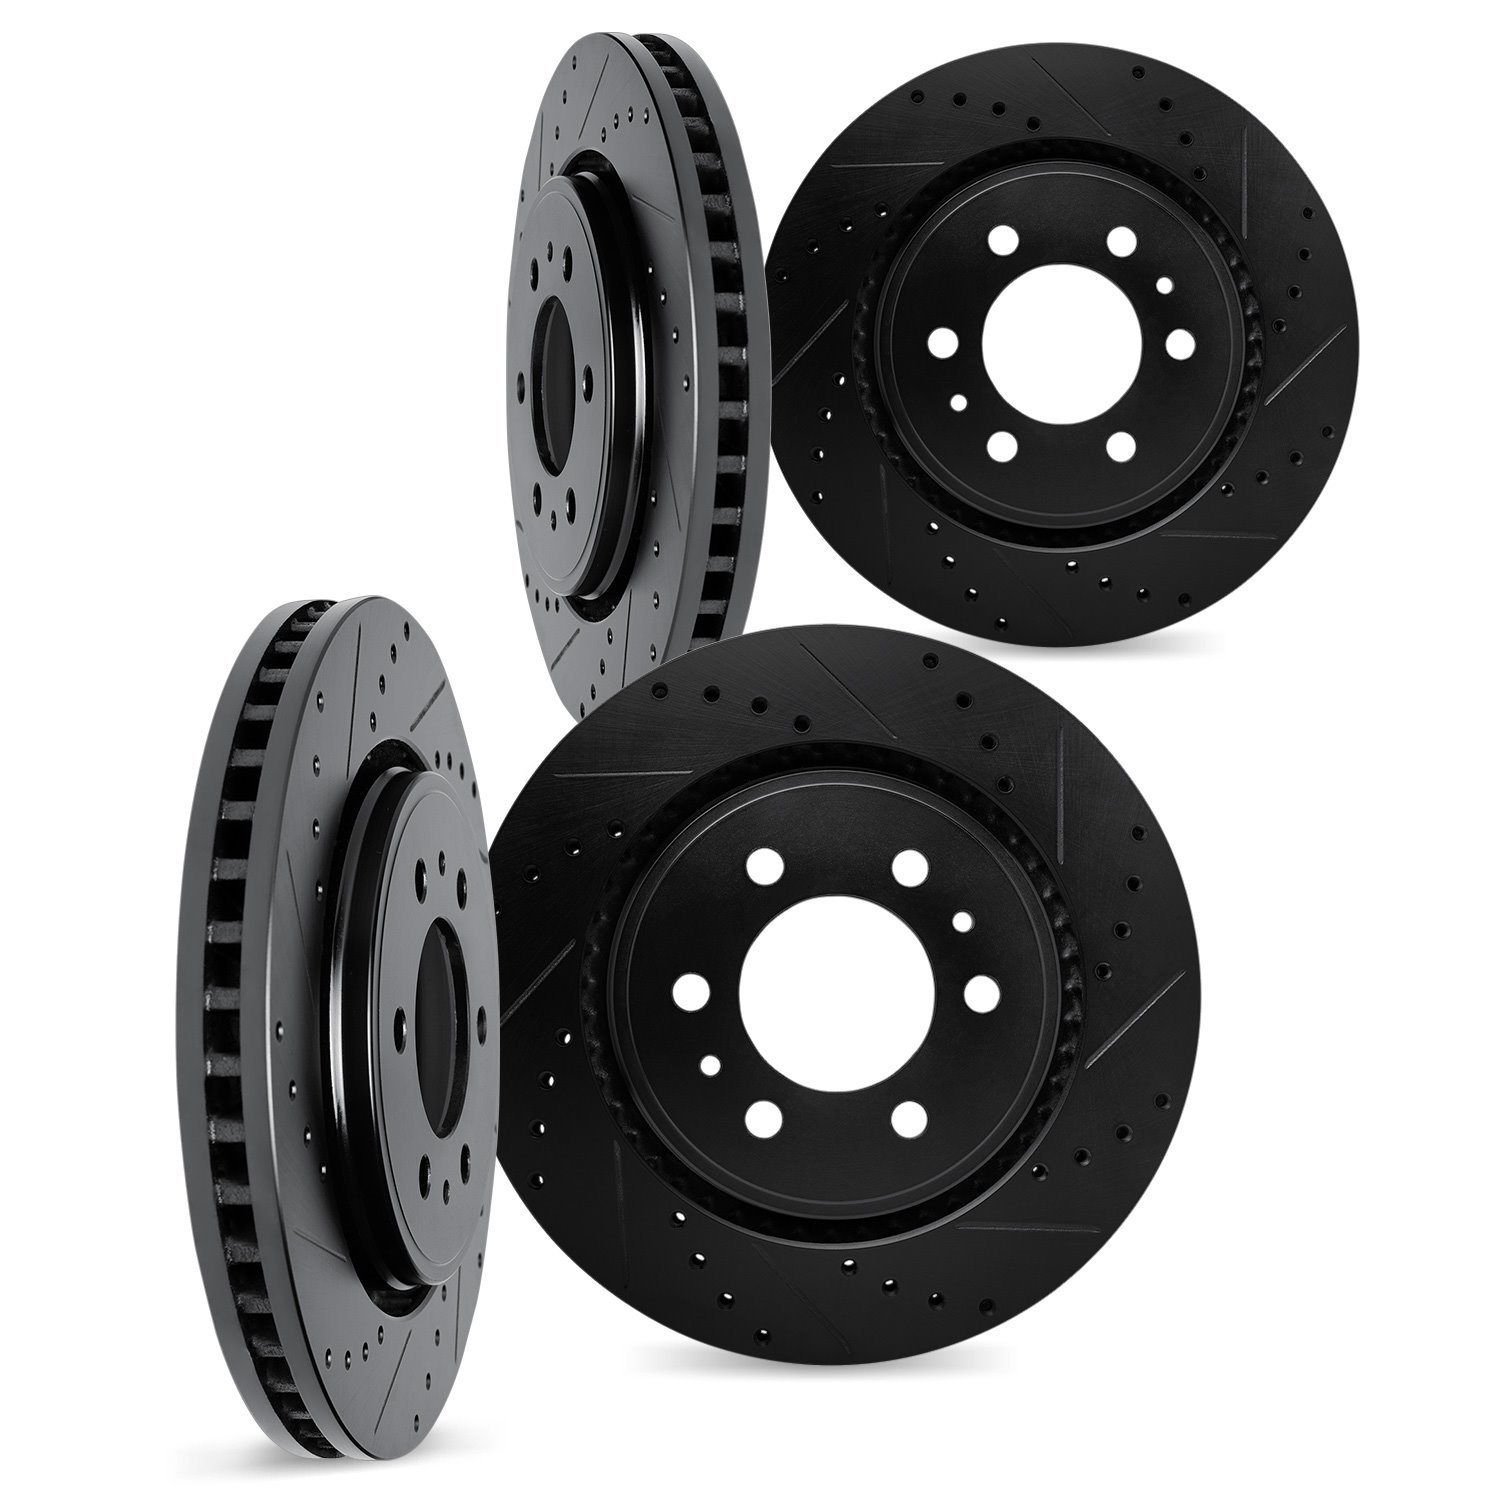 8004-40129 Drilled/Slotted Brake Rotors [Black], Fits Select Mopar, Position: Front and Rear